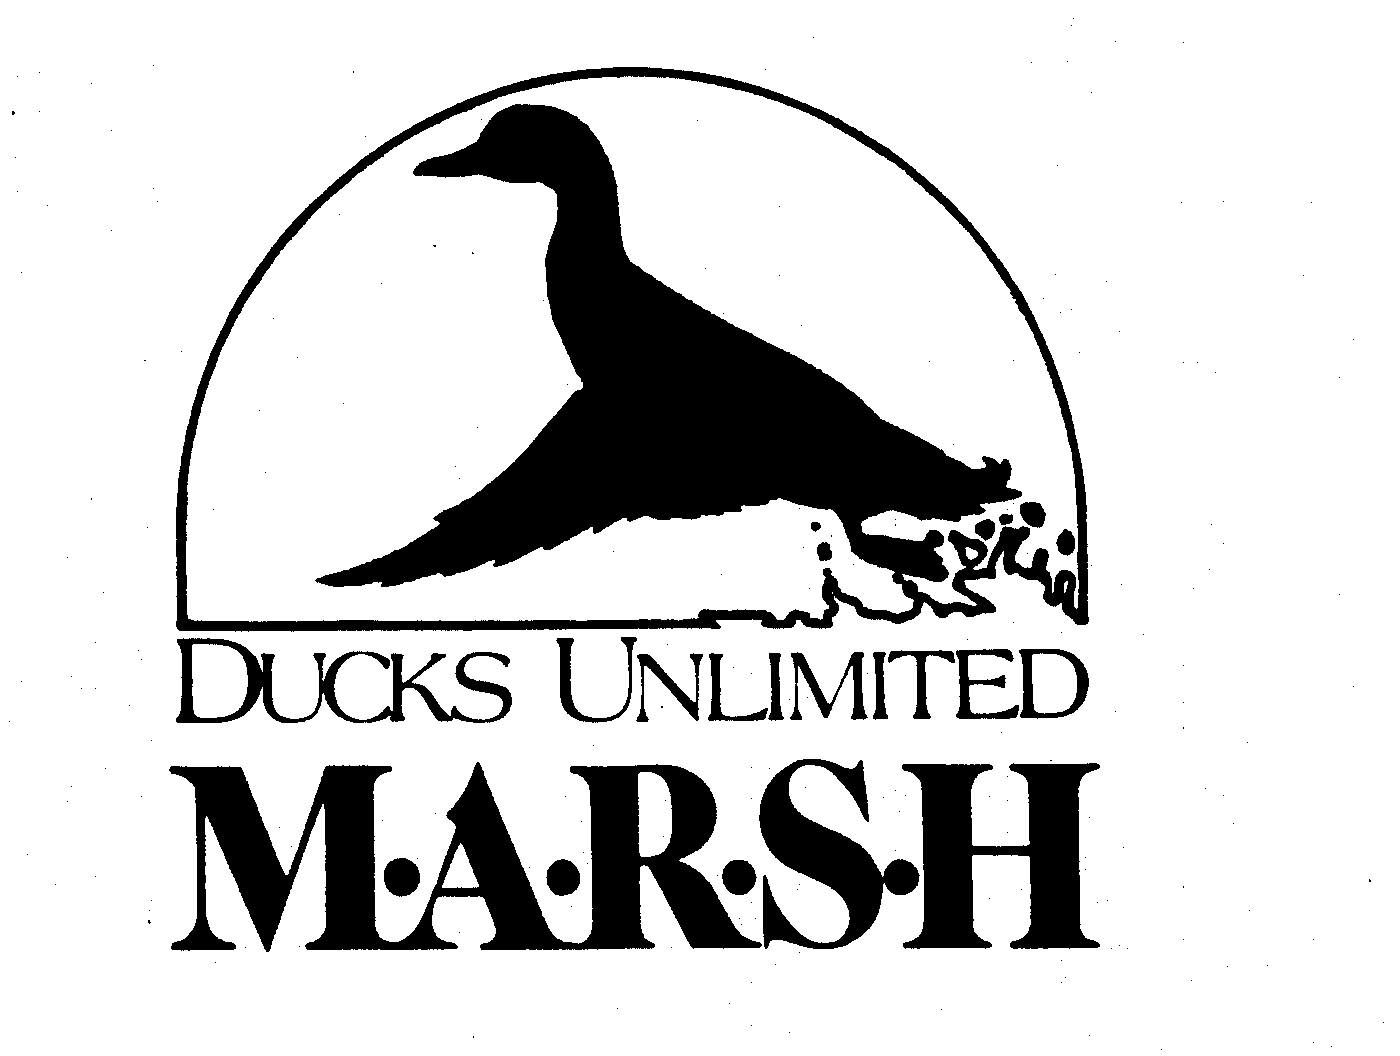  DUCKS UNLIMITED M-A-R-S-H